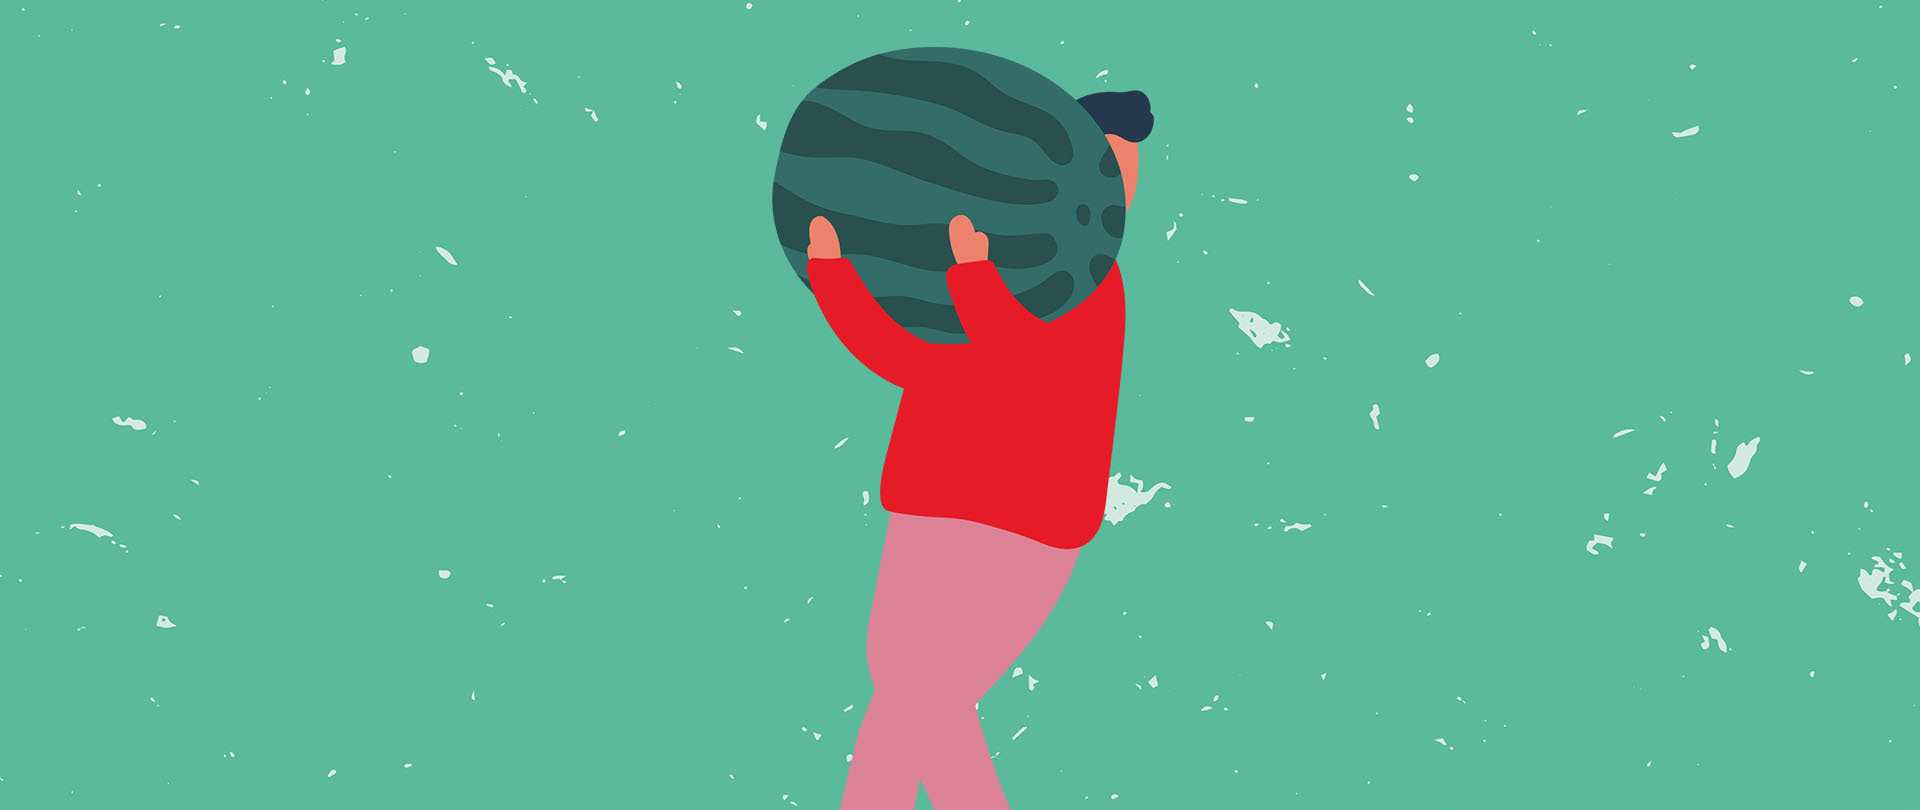 Person carrying a melon illustration